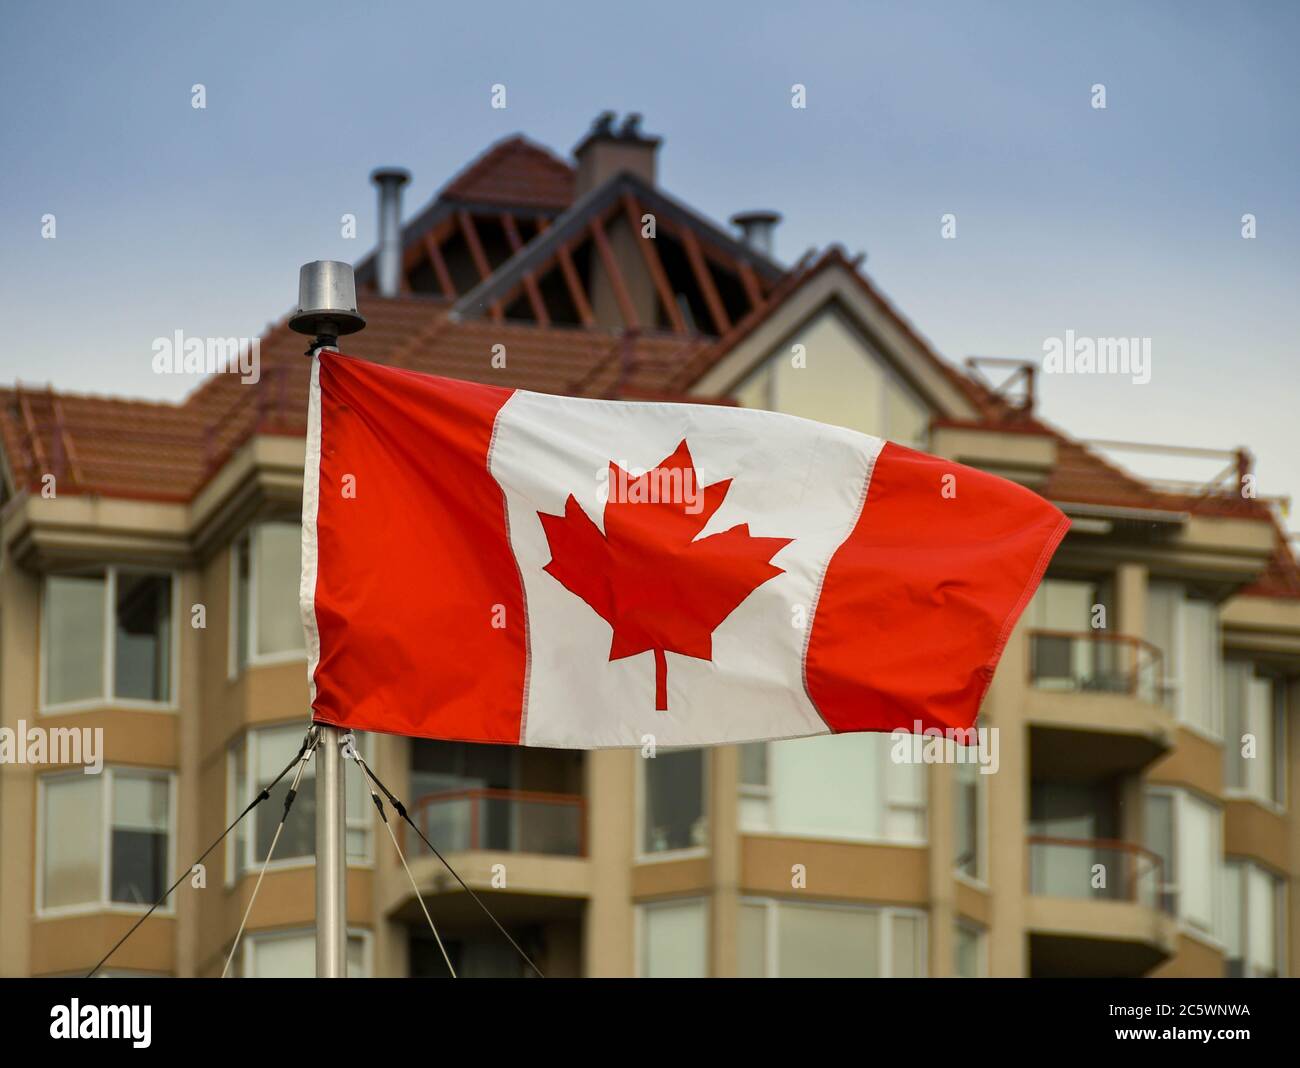 KELOWNA, BRITISH COLUMBIA, CANADA - JUNE 2018: Canadian national flag flying in front of a building in Kelowna, BC. Stock Photo